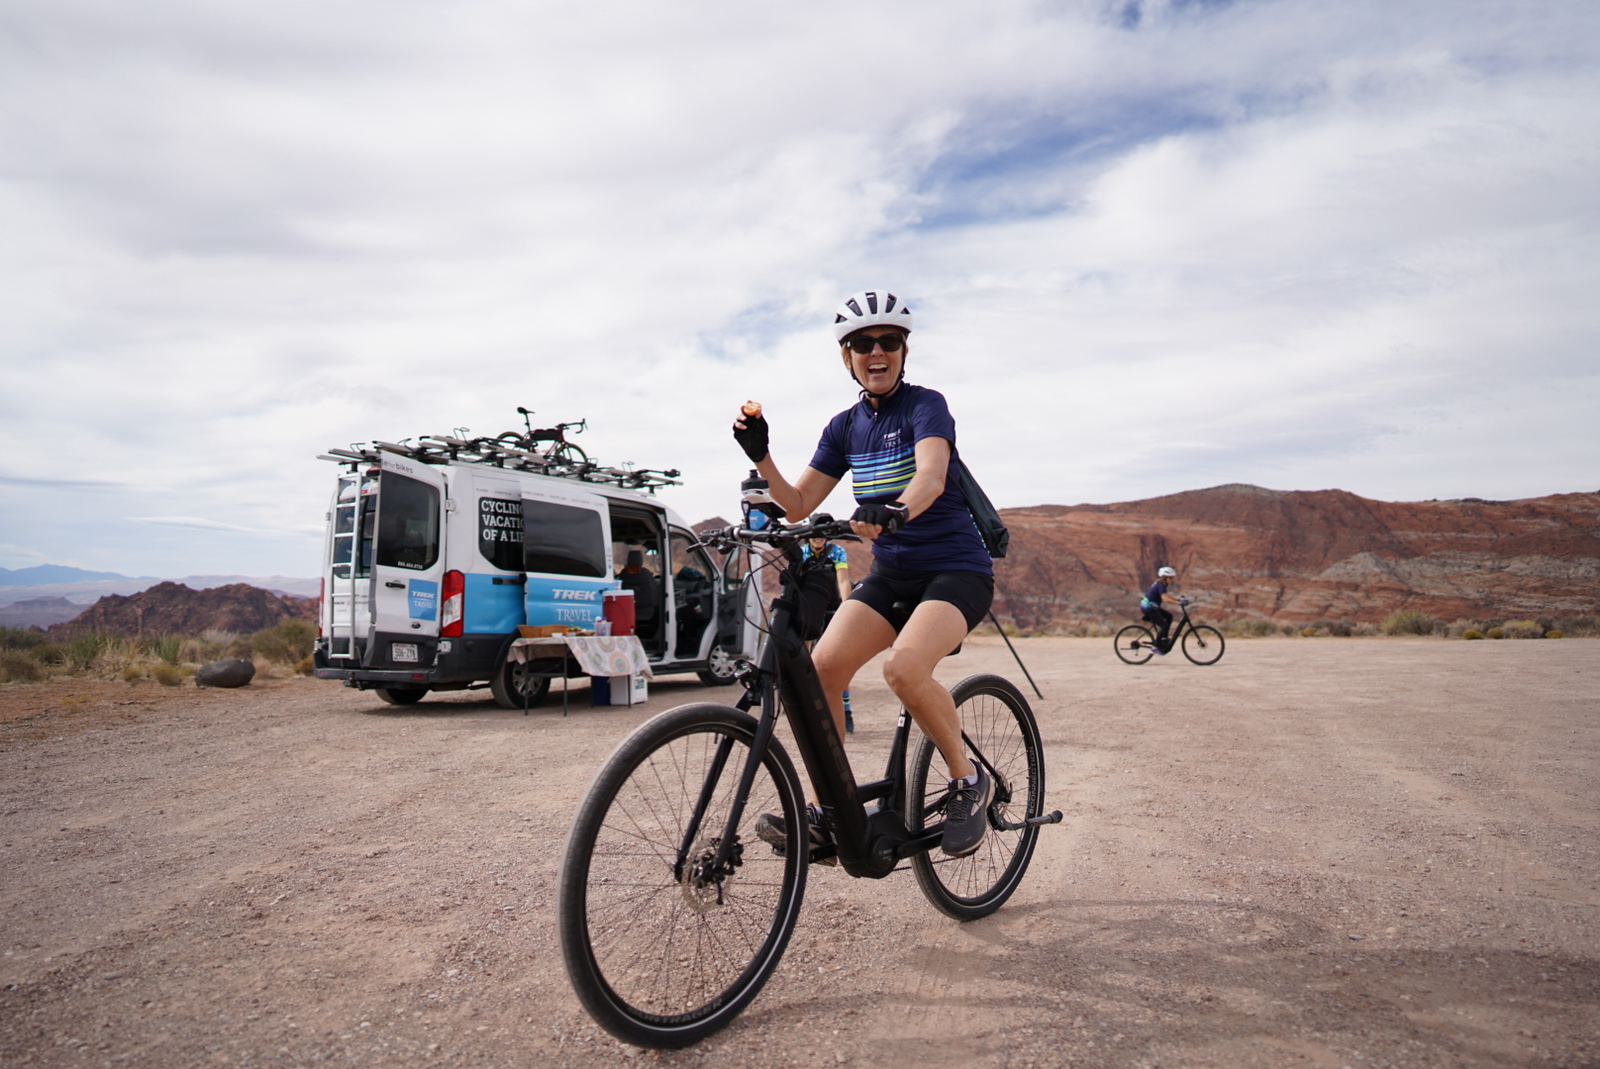 A woman on a Verve+ ebike with the Trek Travel van in the background.